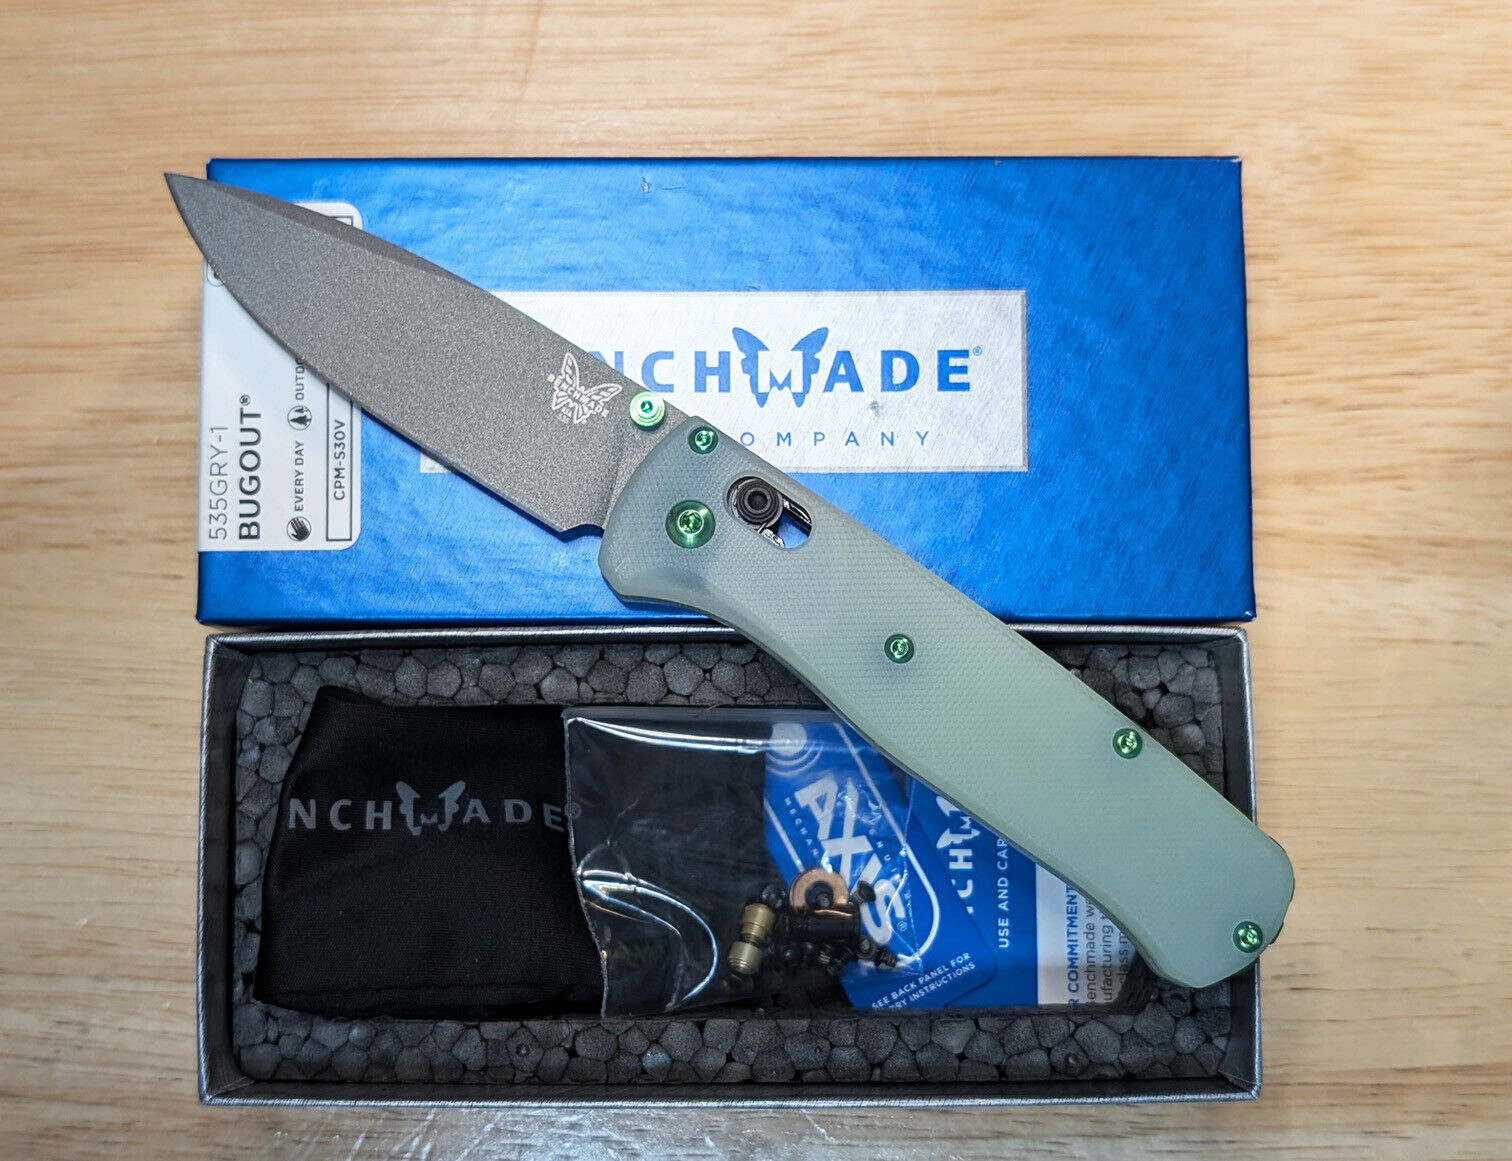 Benchmade Bugout 535GRY-1 Knife S30V Limited Edition 💚 Green Upgrades